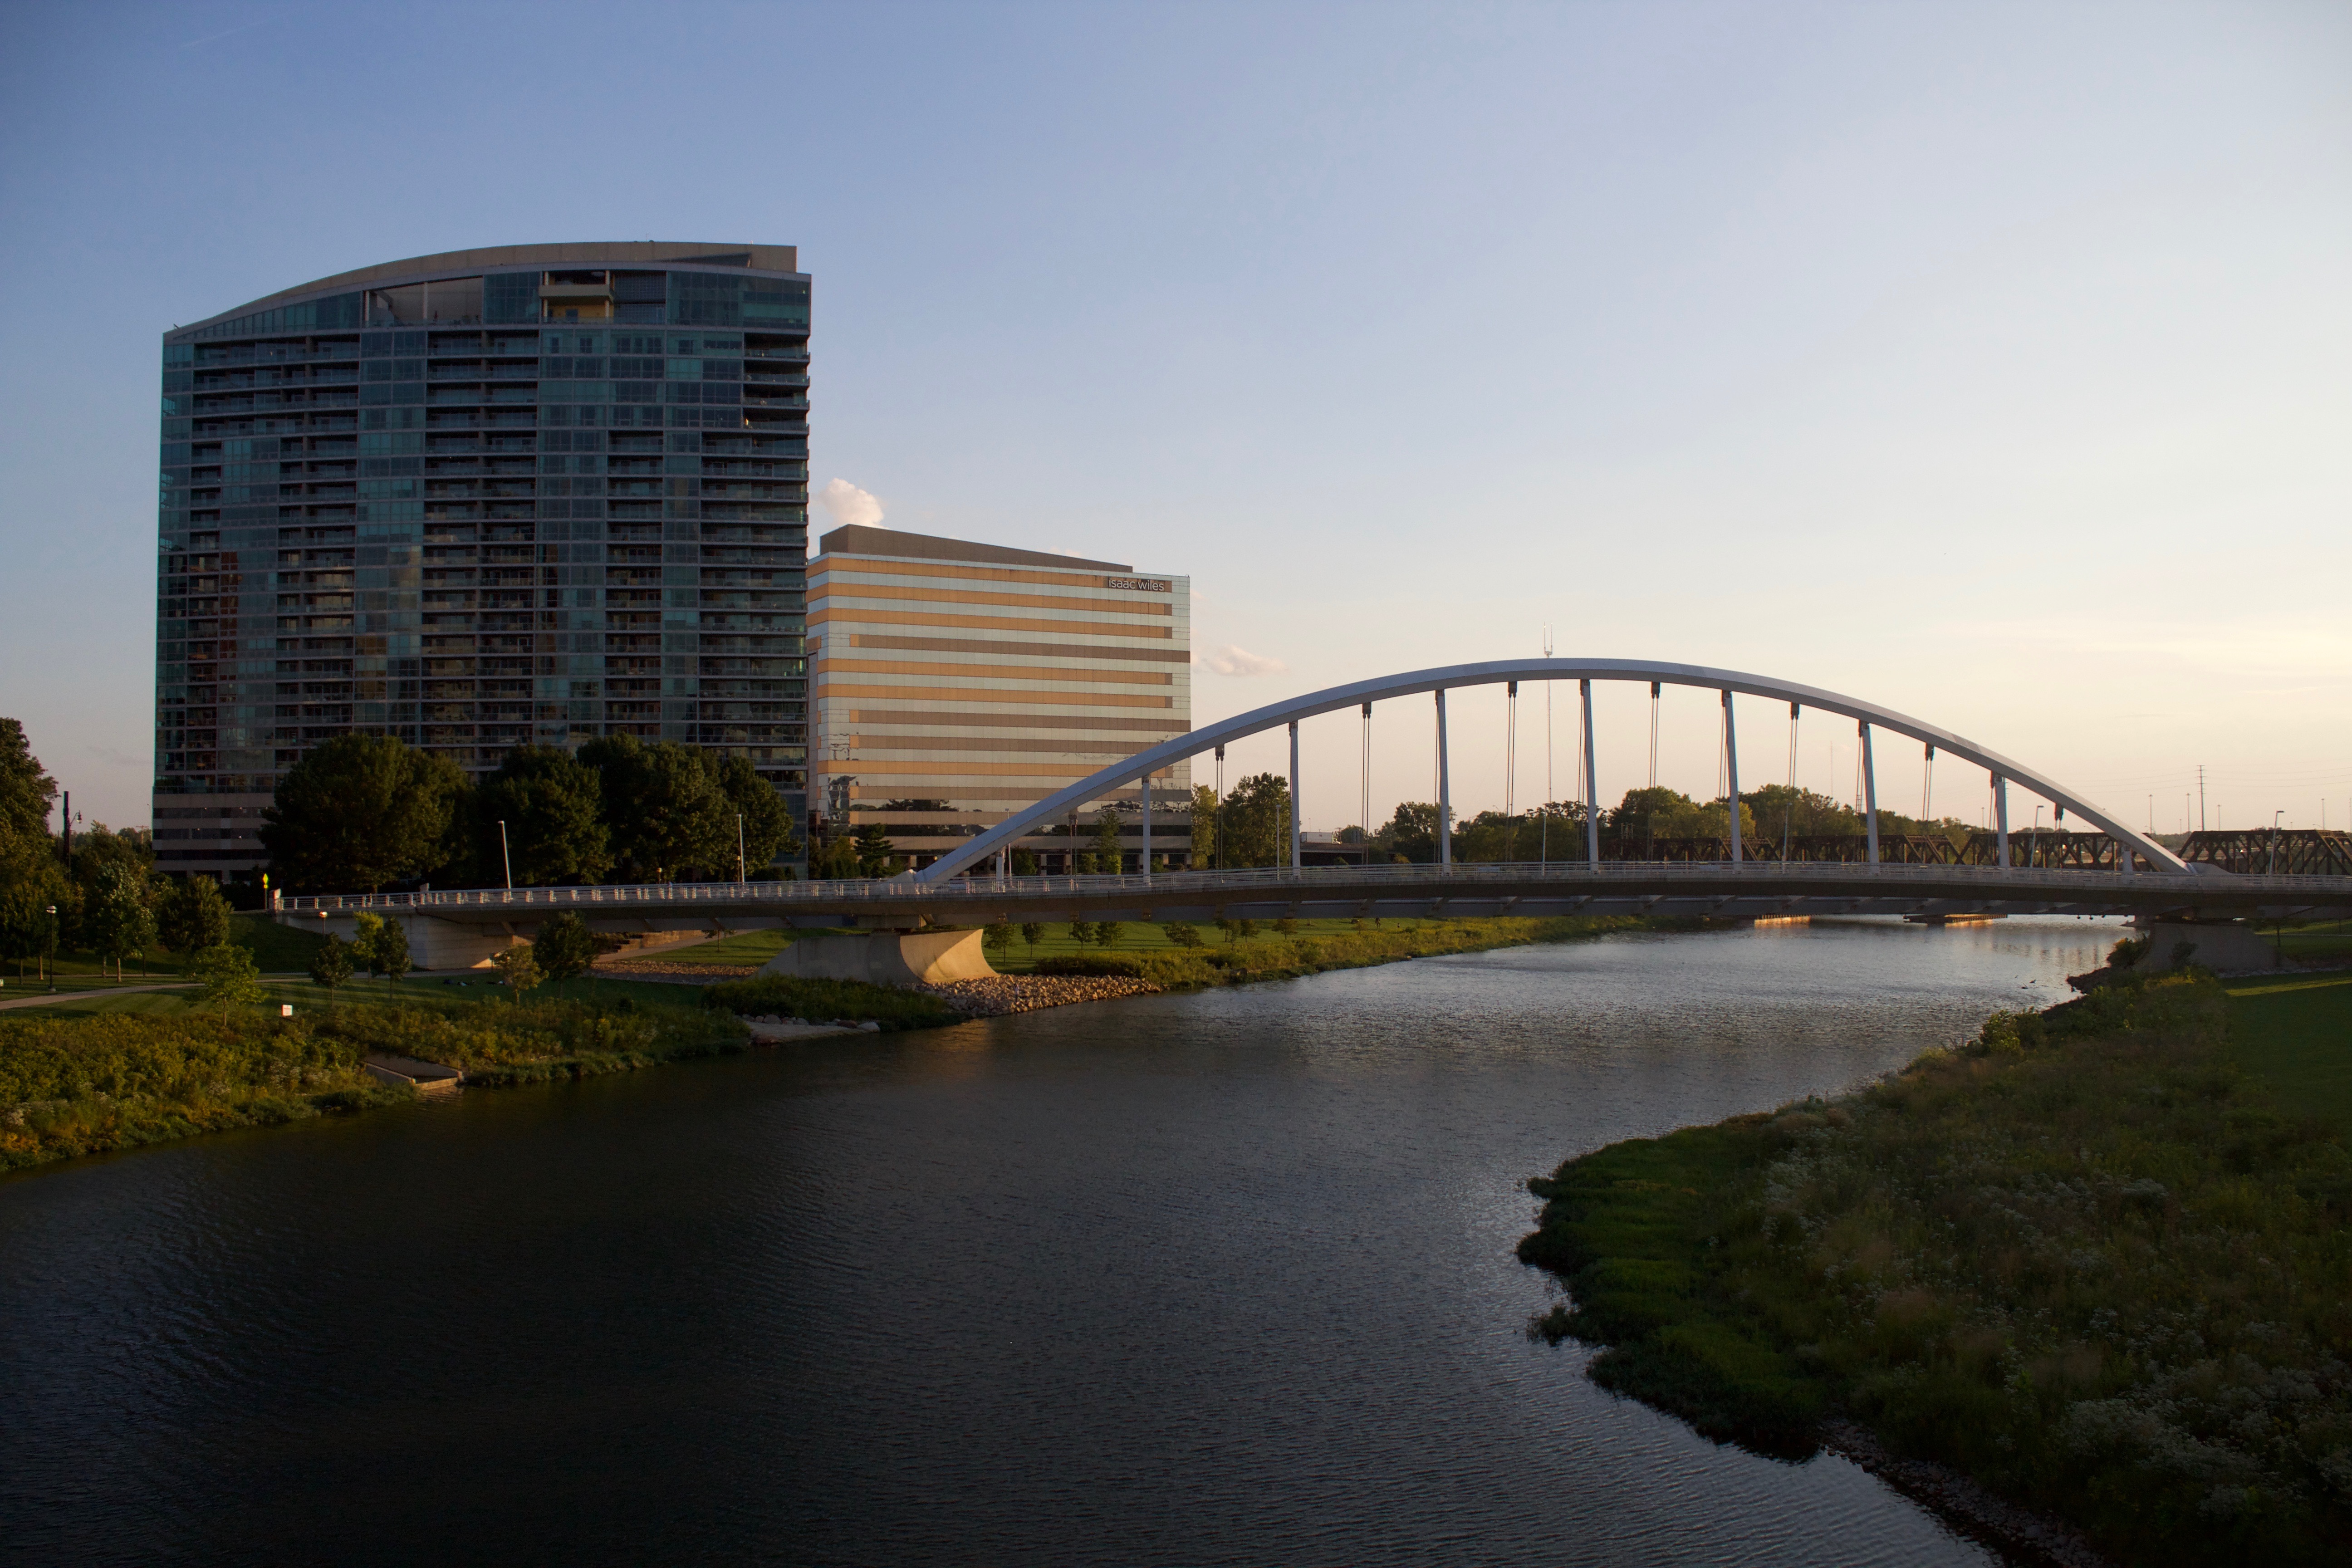 The Scioto River in Columbus, Ohio, that is very reminiscent to Dublin's river Liffey and bridges in Ireland